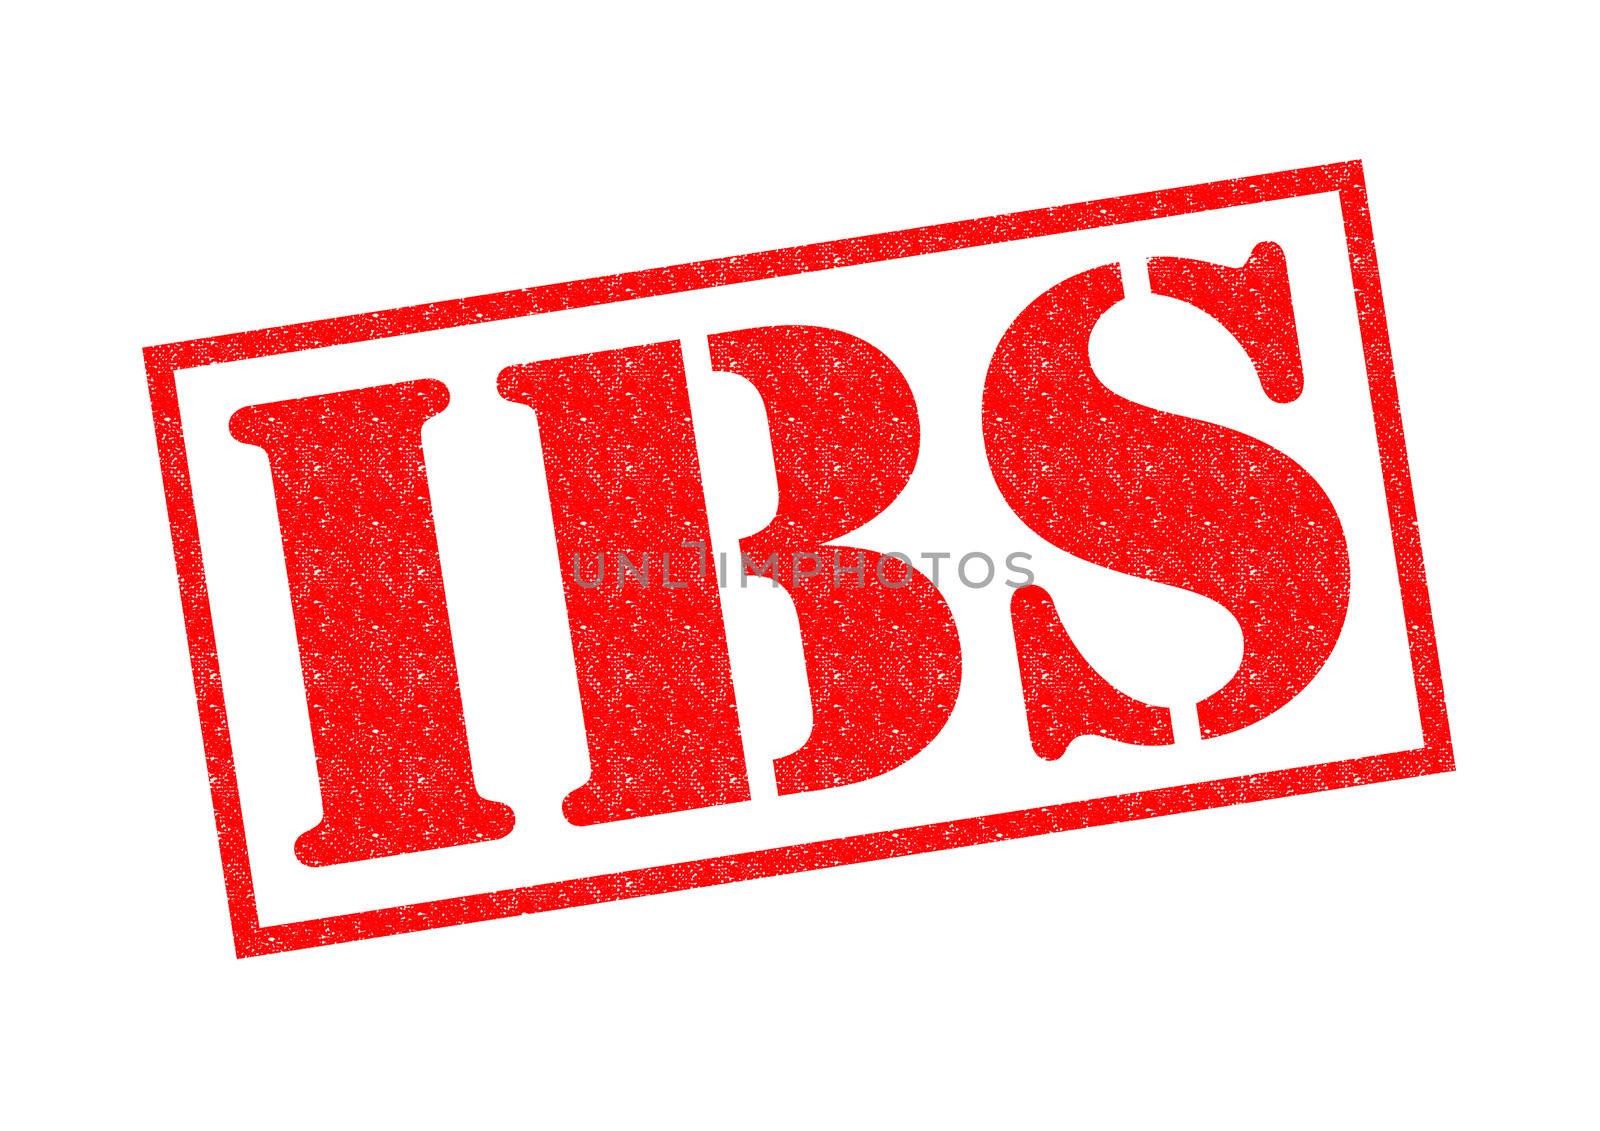 IBS (Irritable Bowel Syndrome) red Rubber Stamp over a white background.